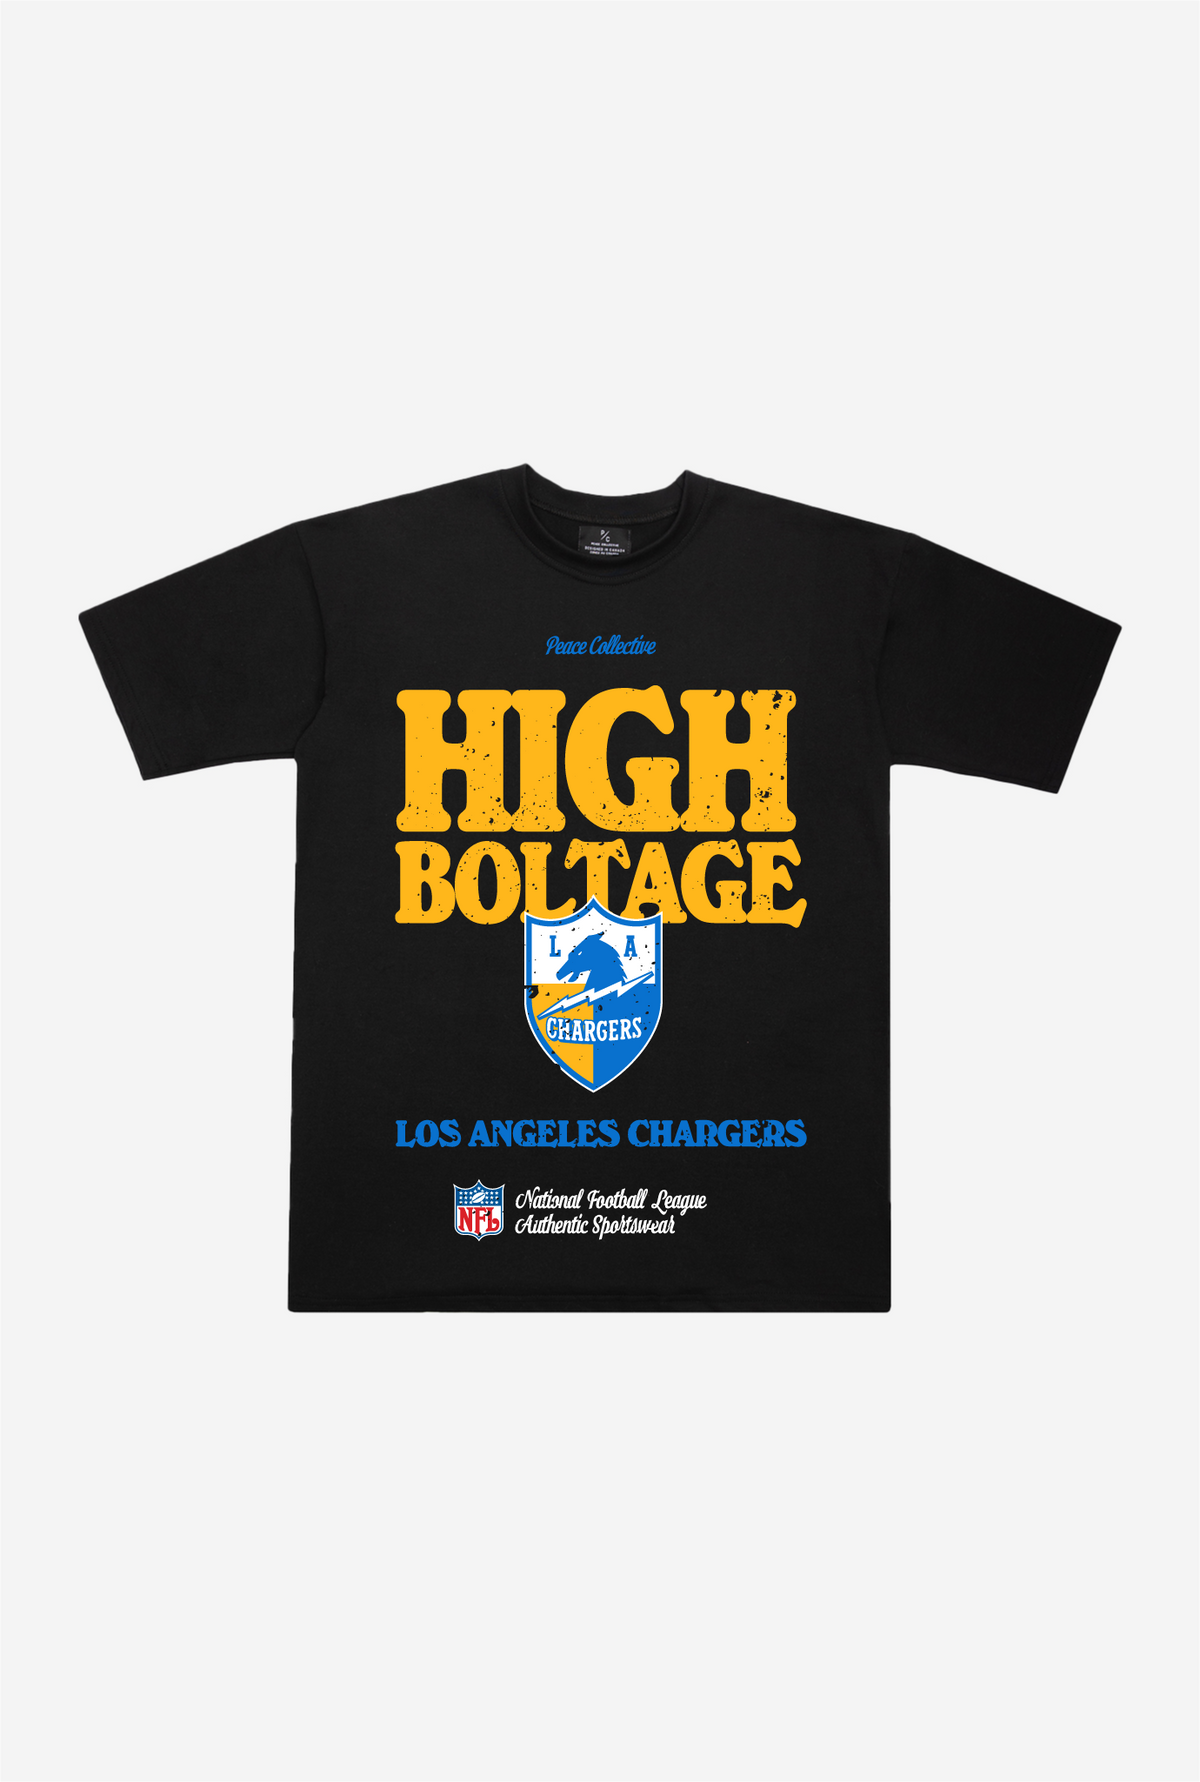 Los Angeles Chargers Vintage Ad Heavyweight T-Shirt - Black